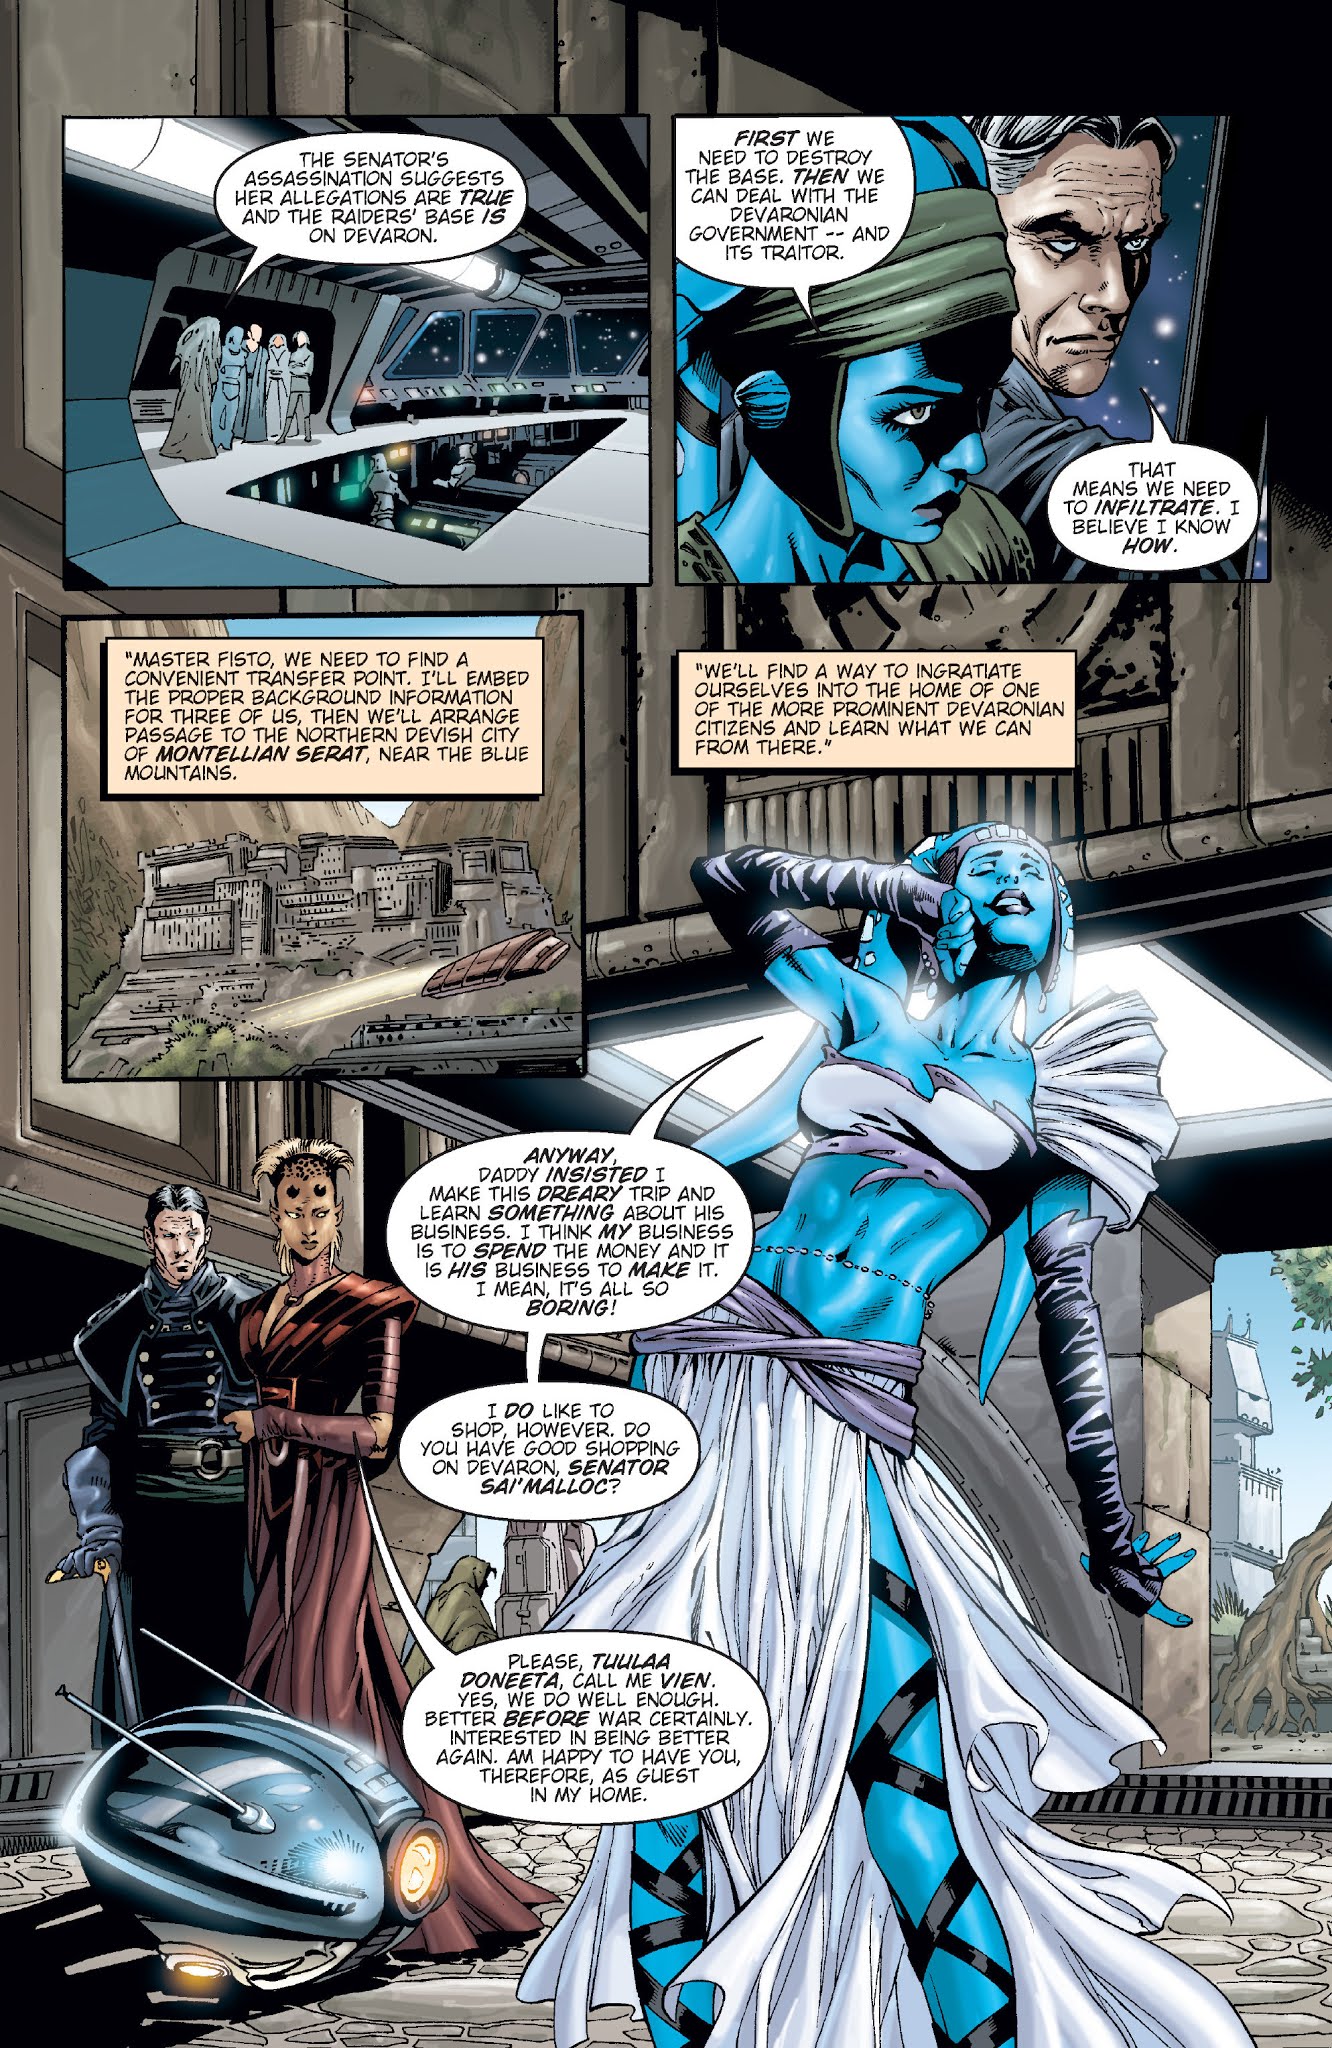 Read online Star Wars: Jedi comic -  Issue # Issue Aayla Secura - 8